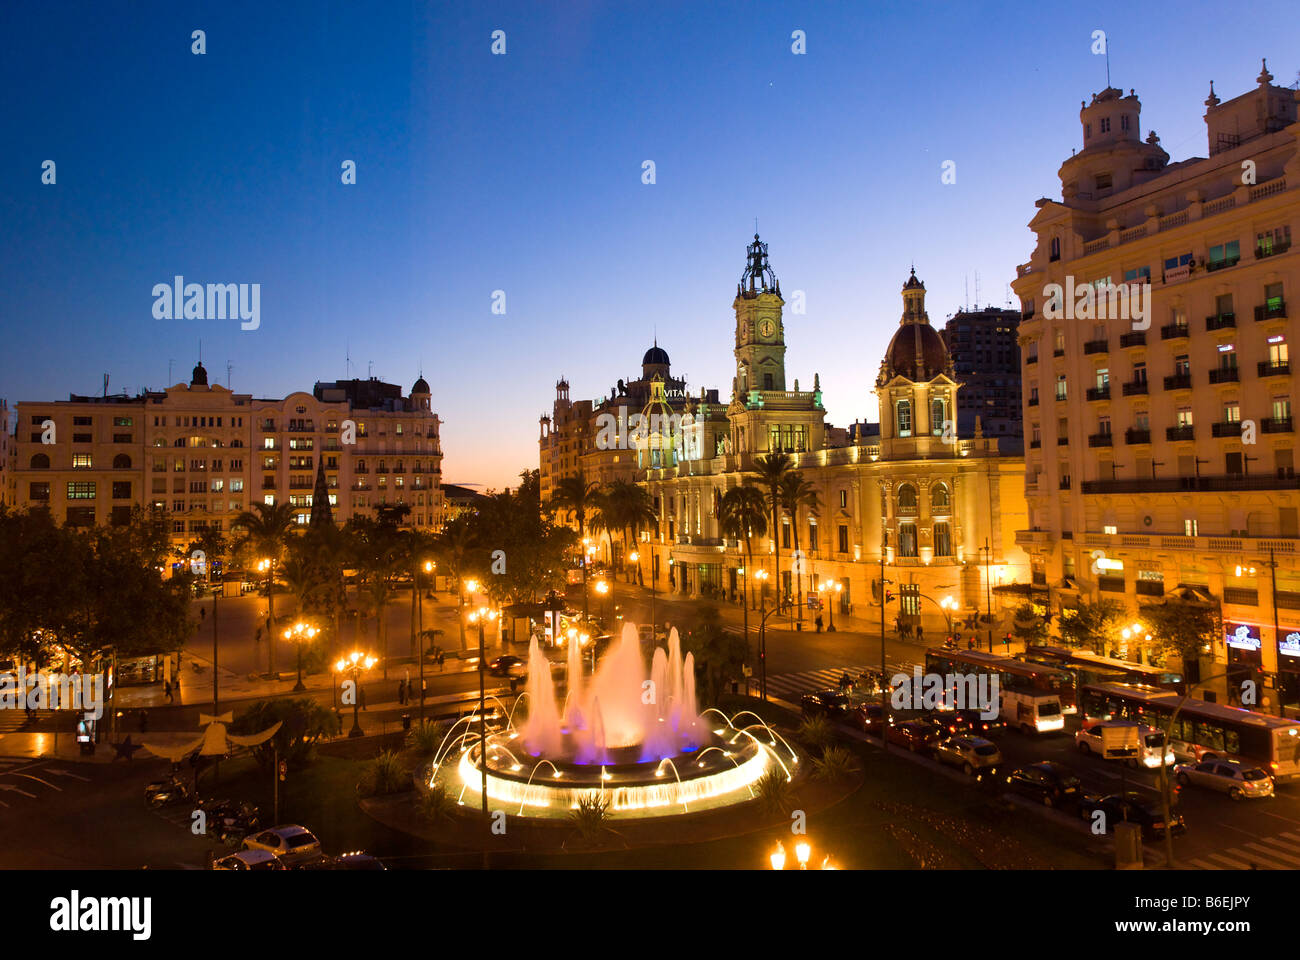 Town Hall building on Plaza Ayuntamiento central square of Valencia Spain Stock Photo